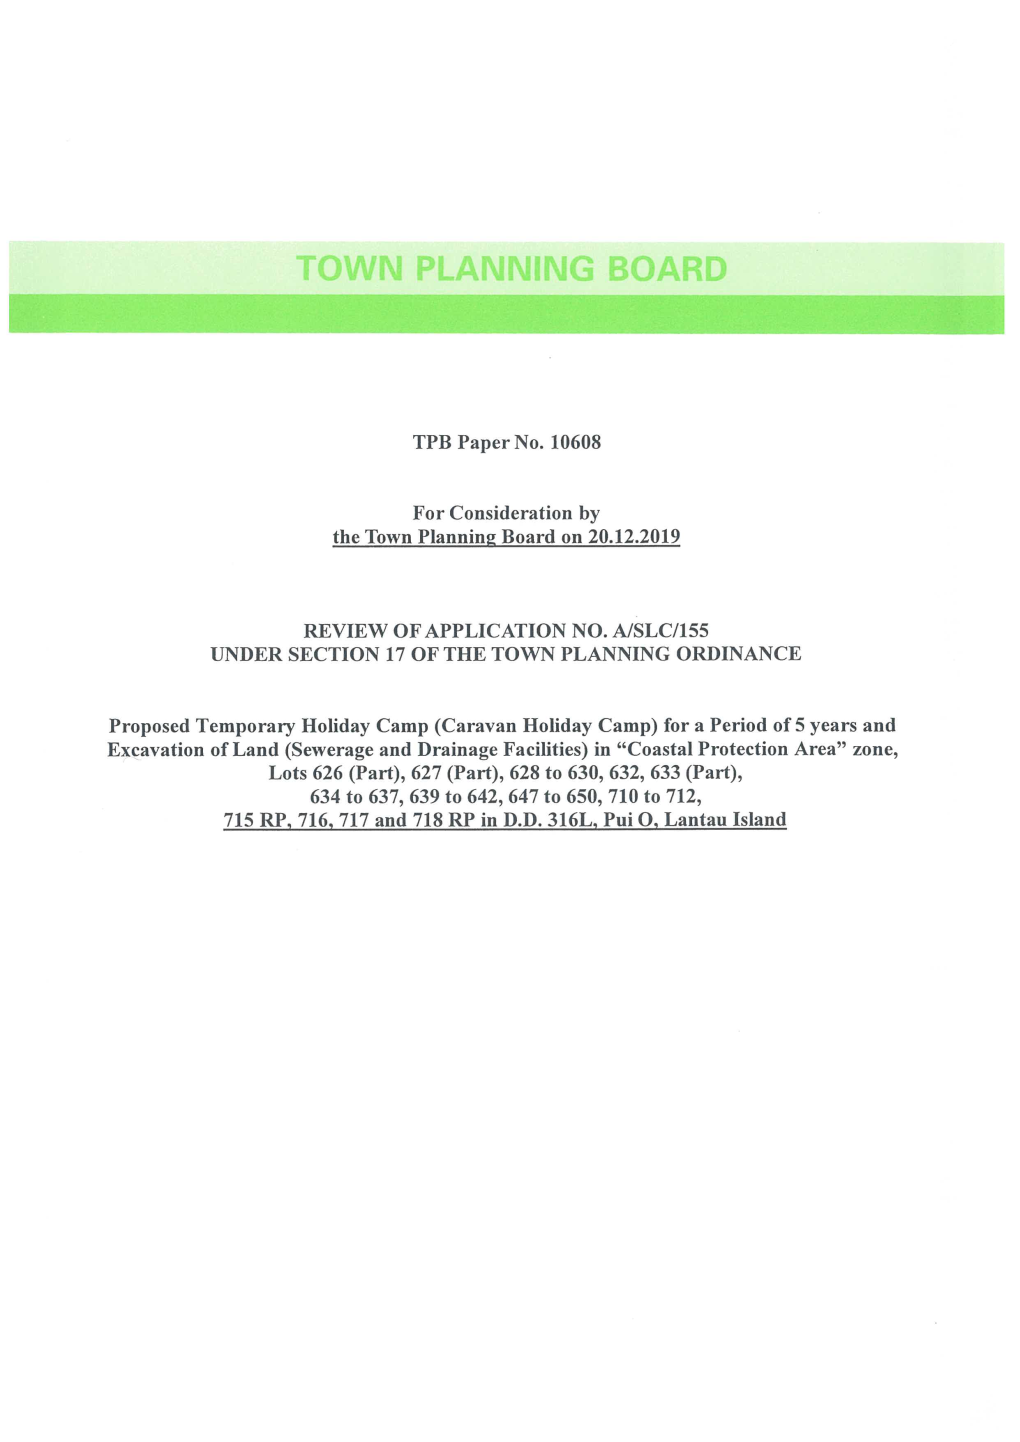 TPB Paper No. 10608 for Consideration by the Town Planning Board on 20.12.2019